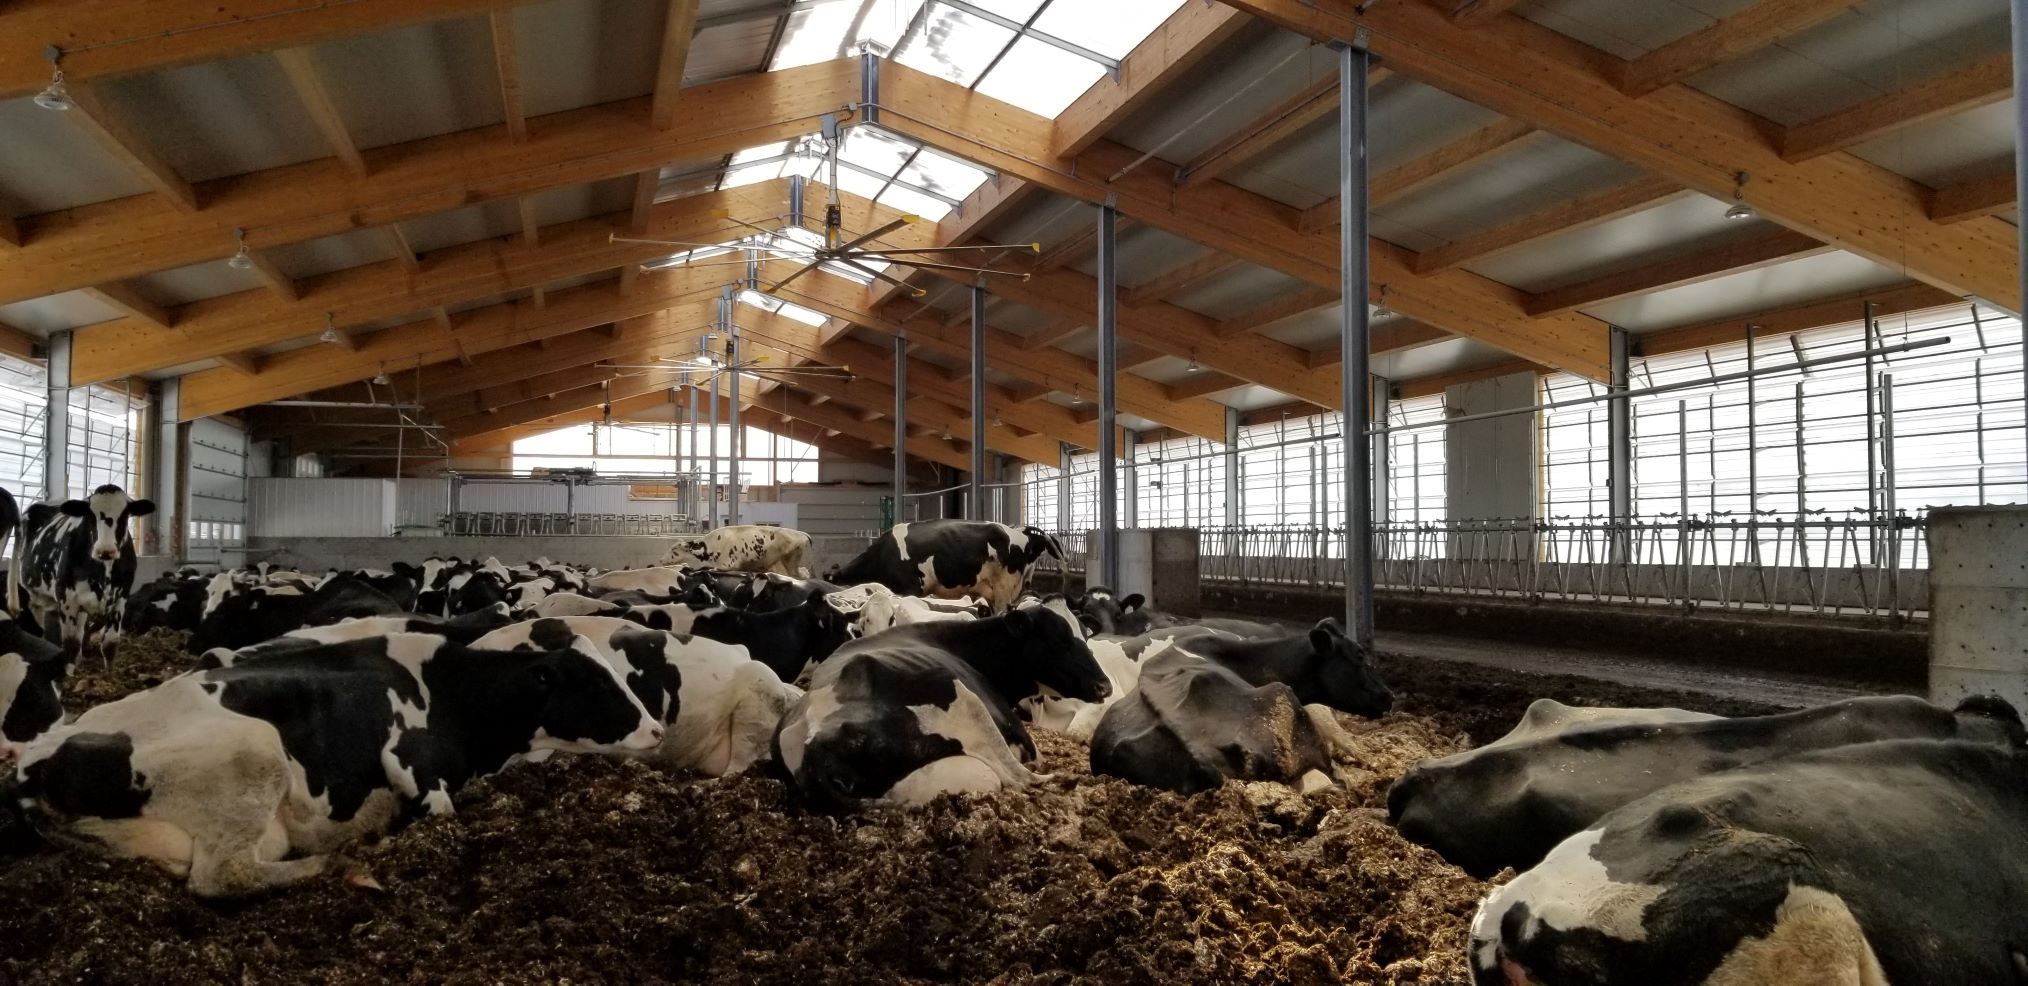 2019 Clarenceville, Quebec - Dairy barn